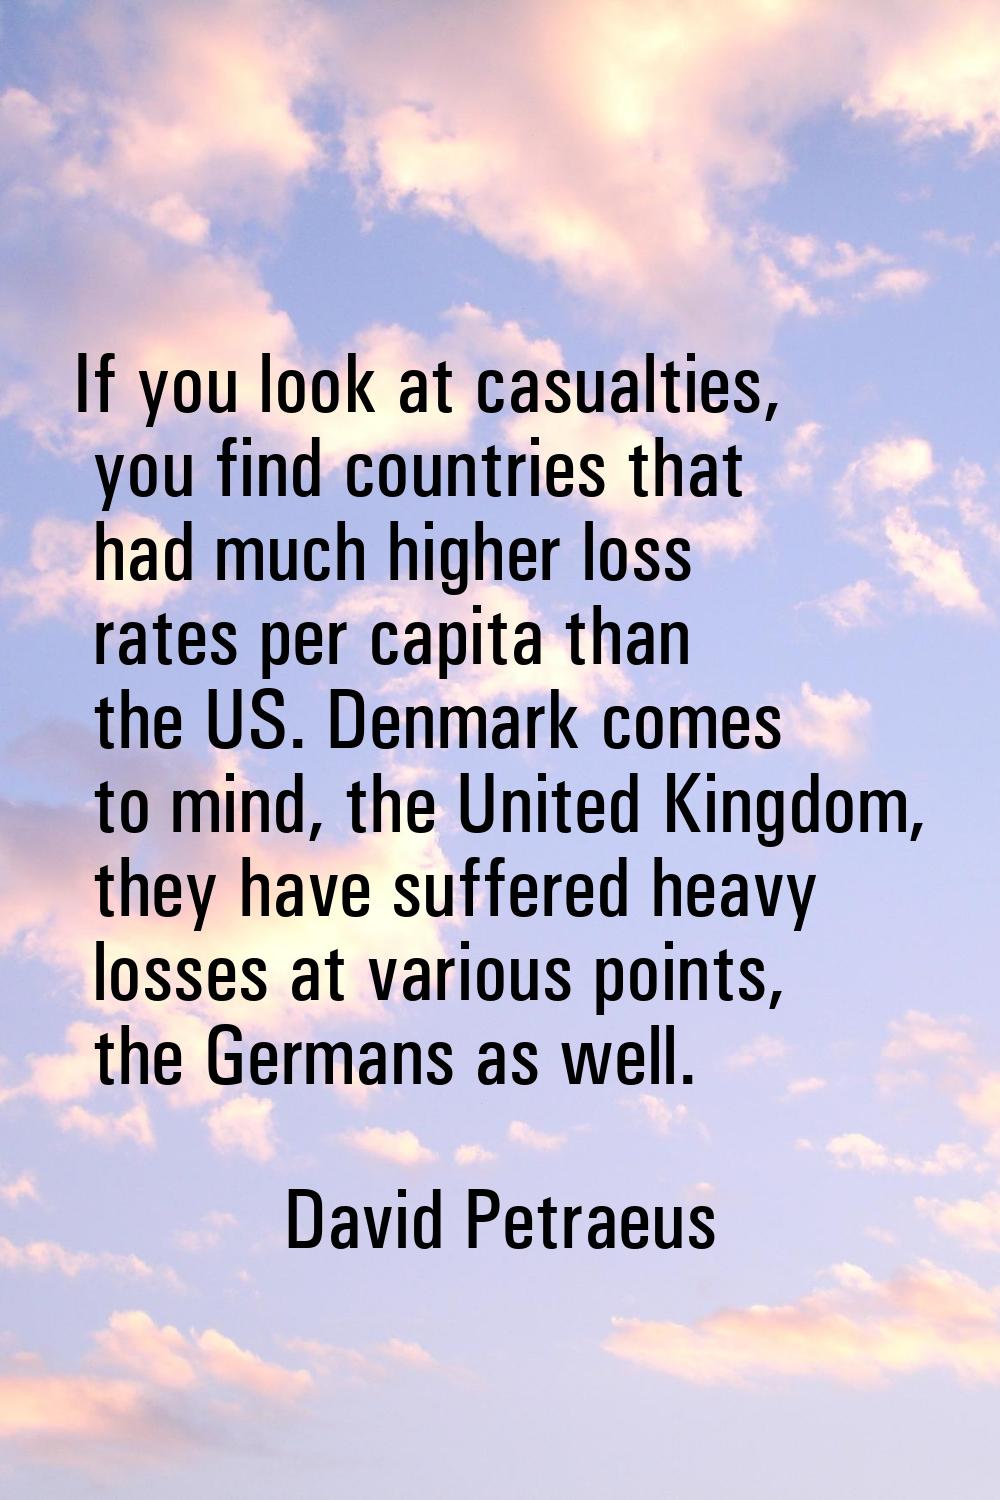 If you look at casualties, you find countries that had much higher loss rates per capita than the U